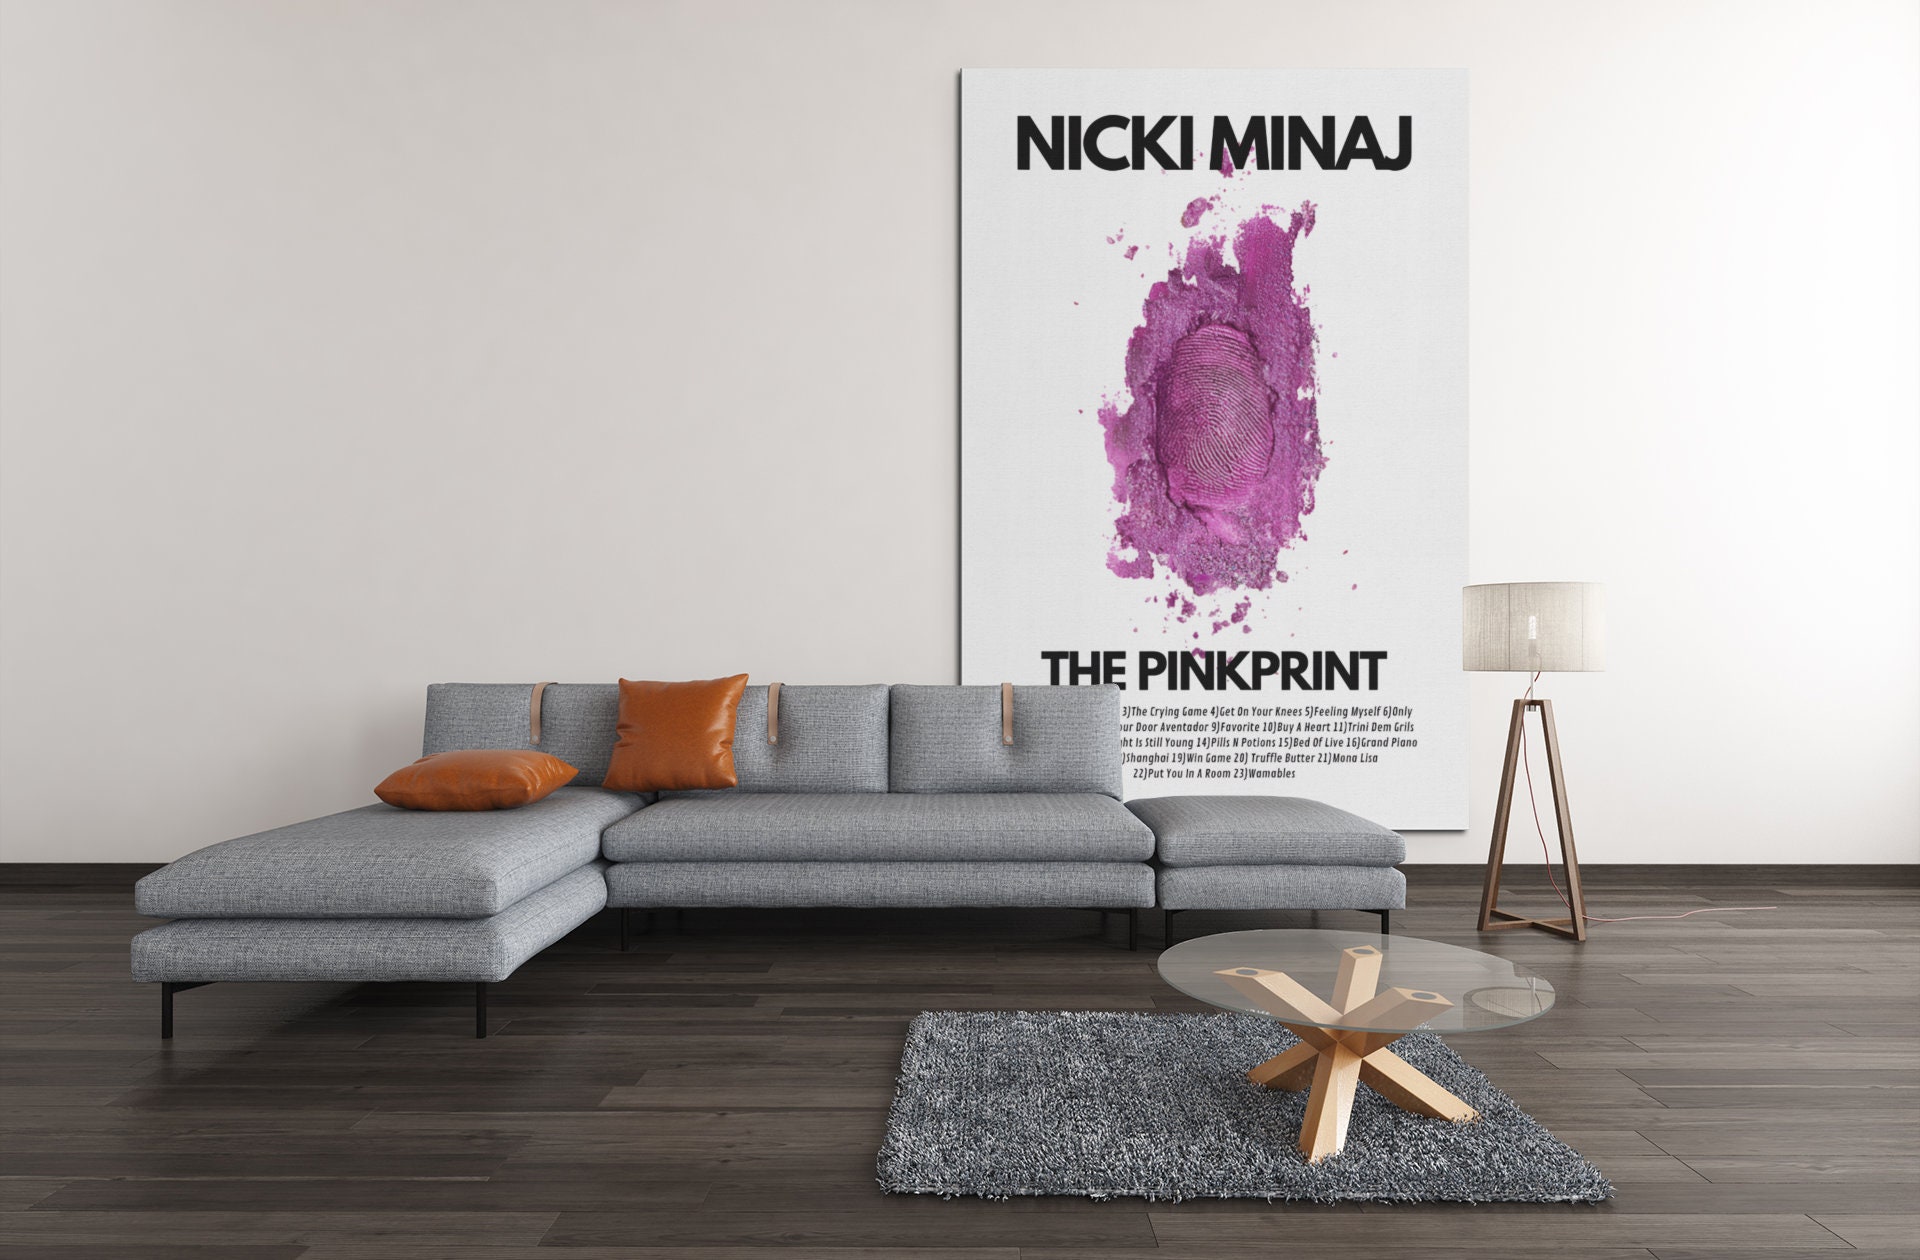 Nicki Minaj | Nicki Minaj Poster | Nicki Minaj Album Poster